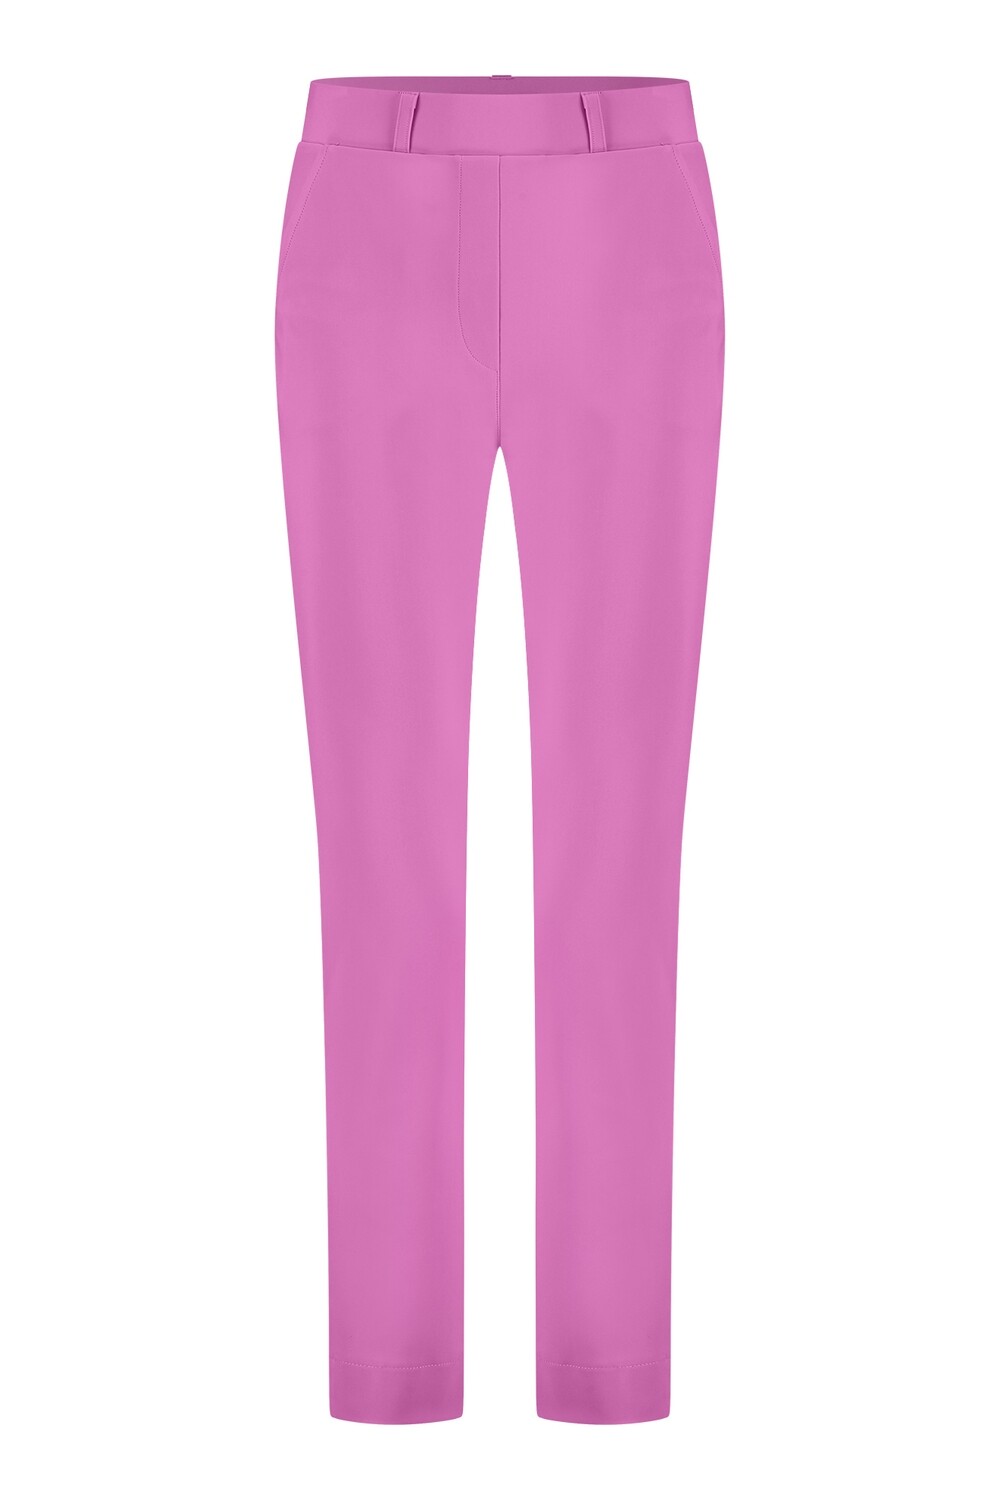 Studio Anneloes Anke bonded piping trousers, Dark Pink